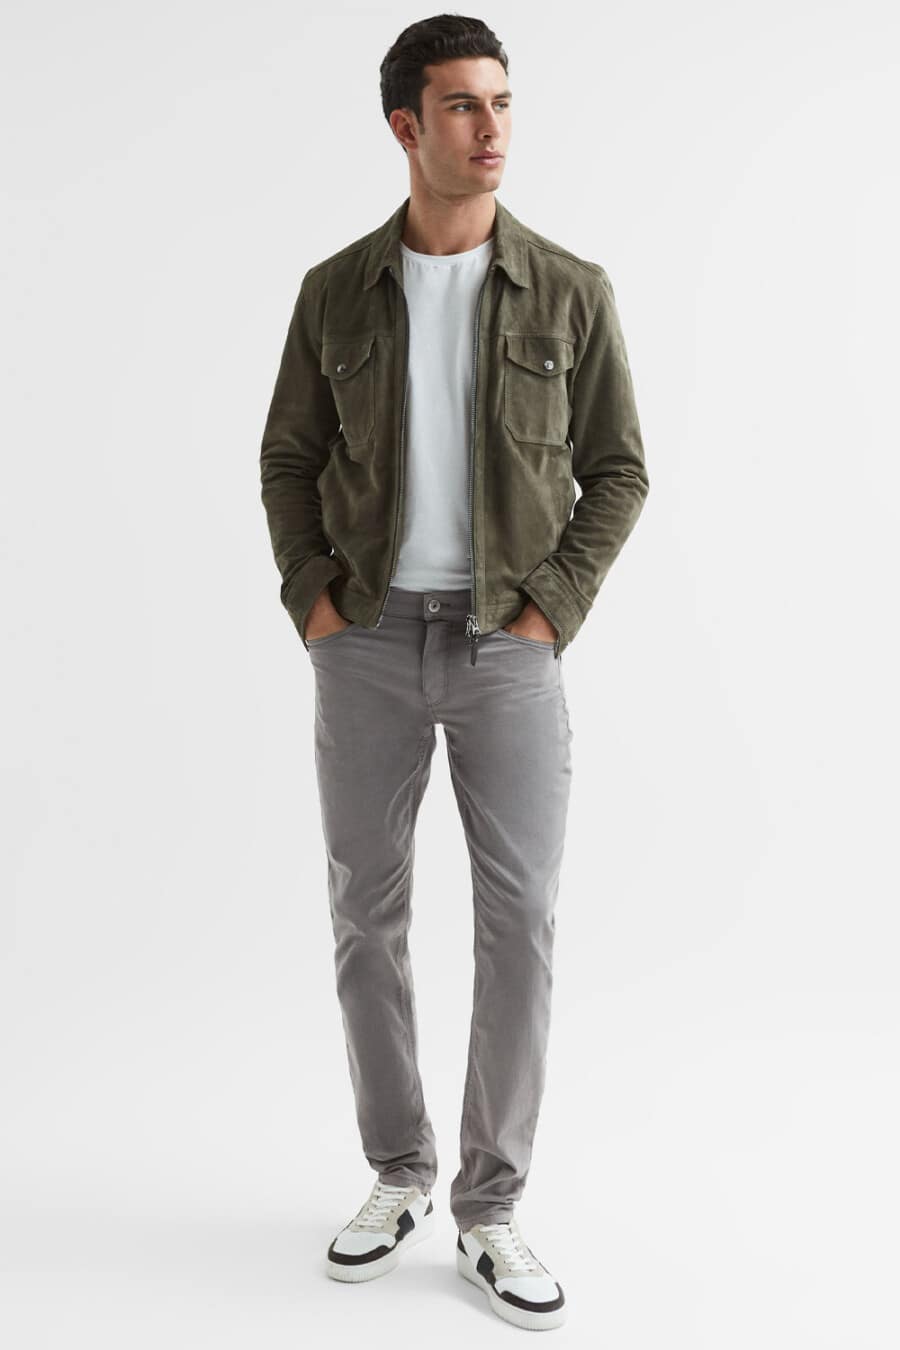 Men's grey jeans, white T-shirt, green suede jacket and white sneakers outfit